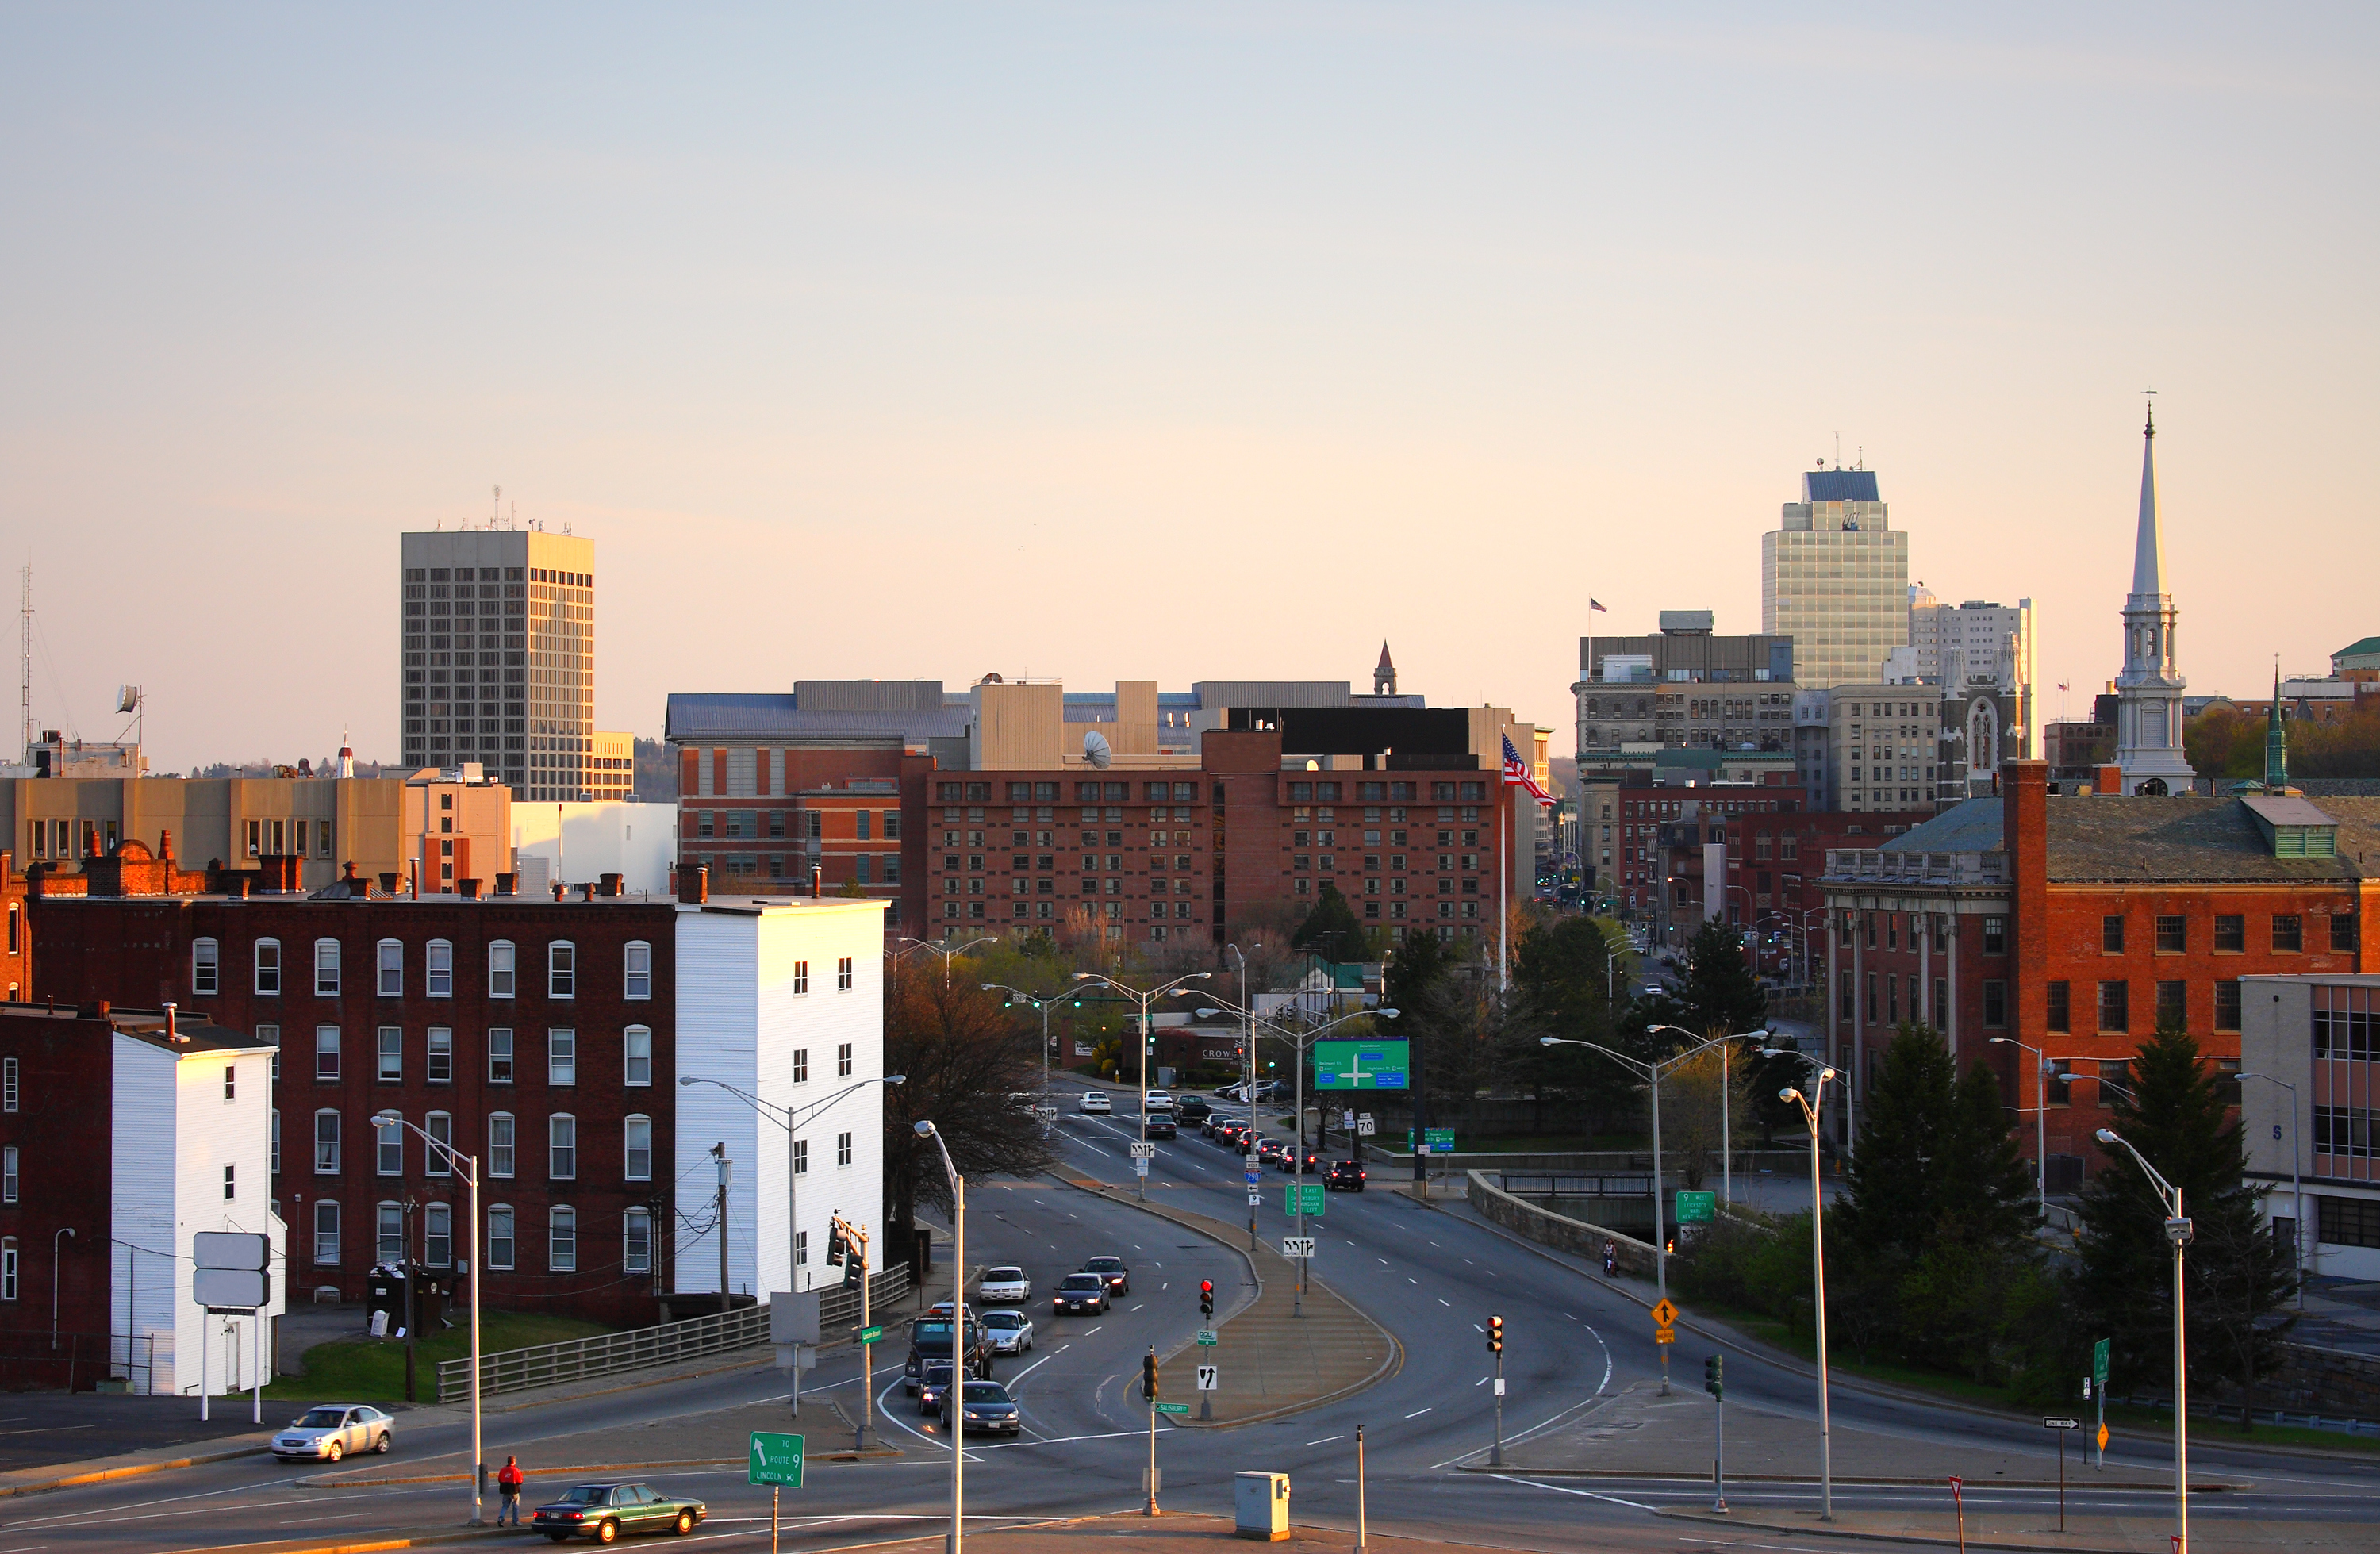 The city of Worcester at twilight